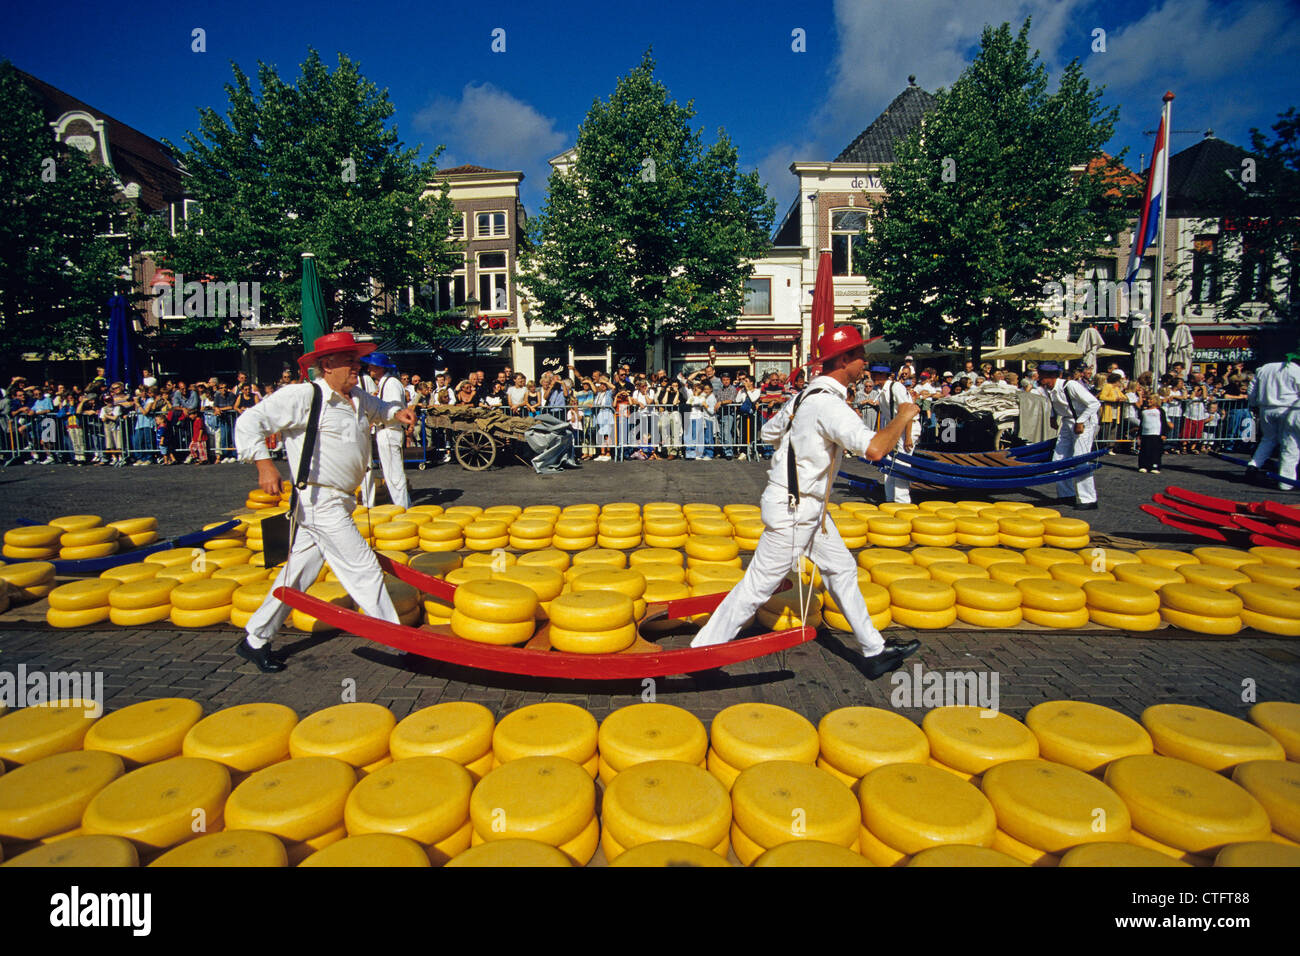 Netherlands, Alkmaar, Men in traditional clothing carrying cheese. Stock Photo